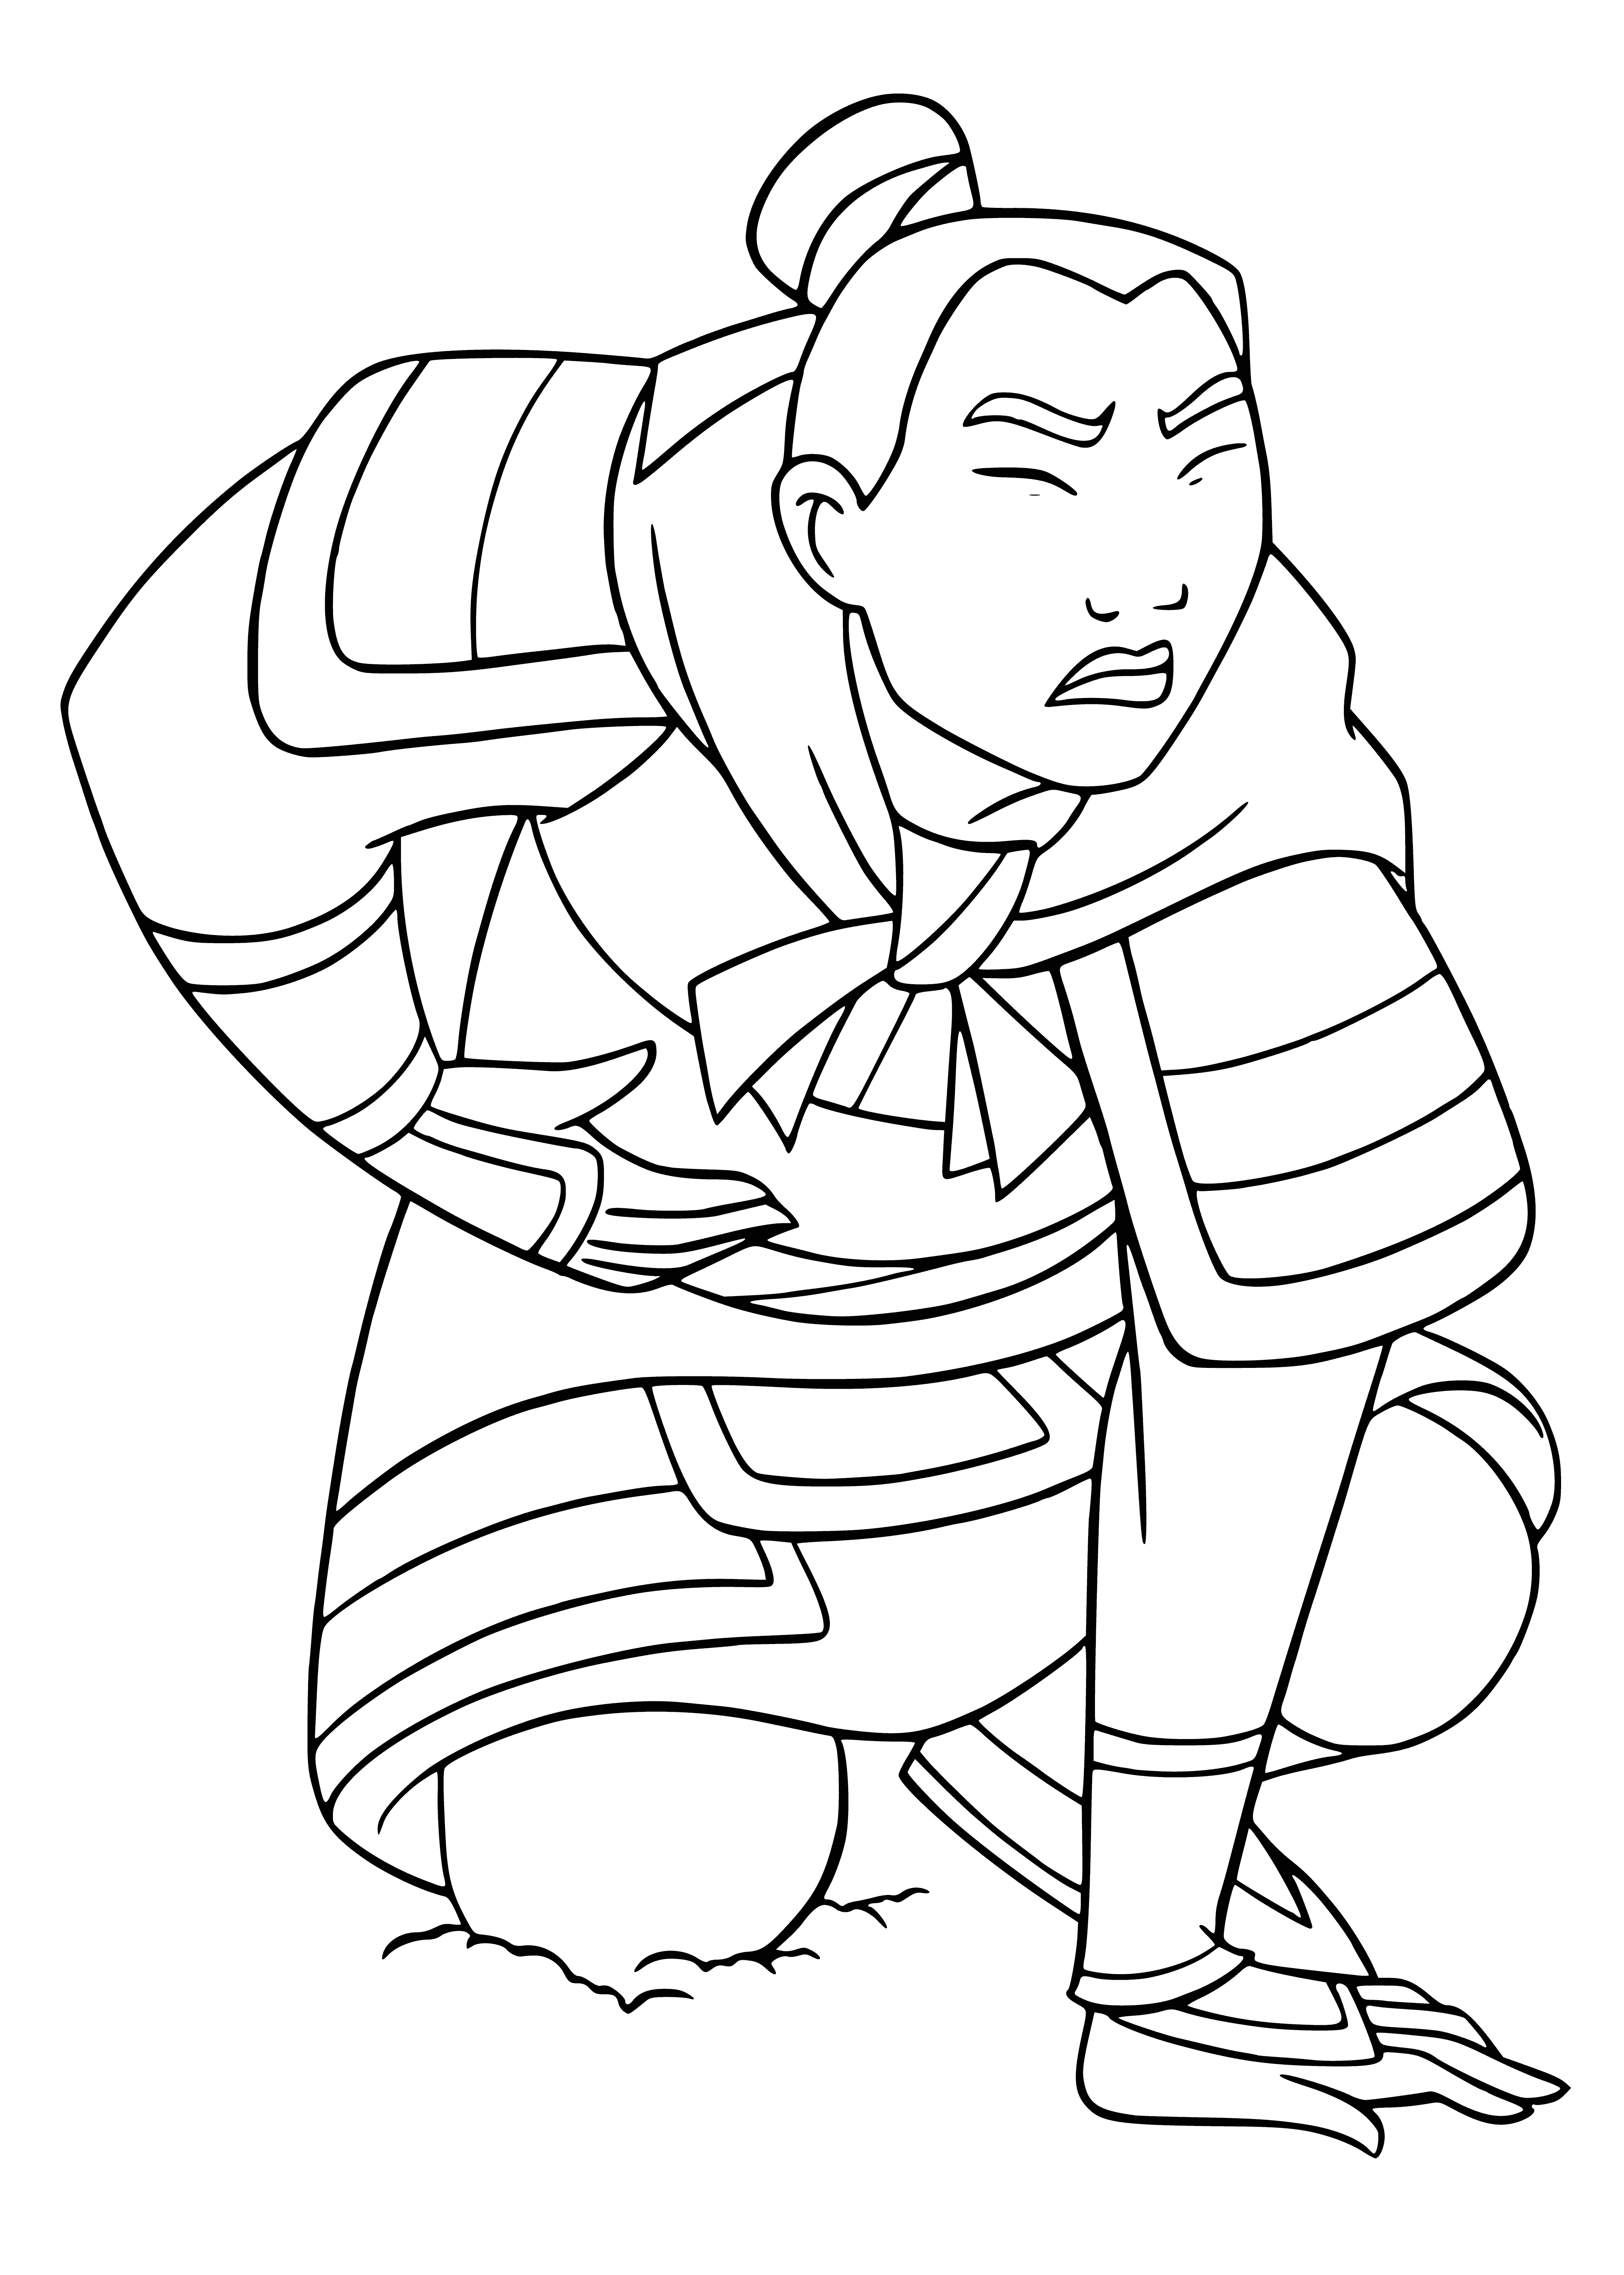 coloring page: → Mulan stands before a tree, wounded, pale, and in pain.